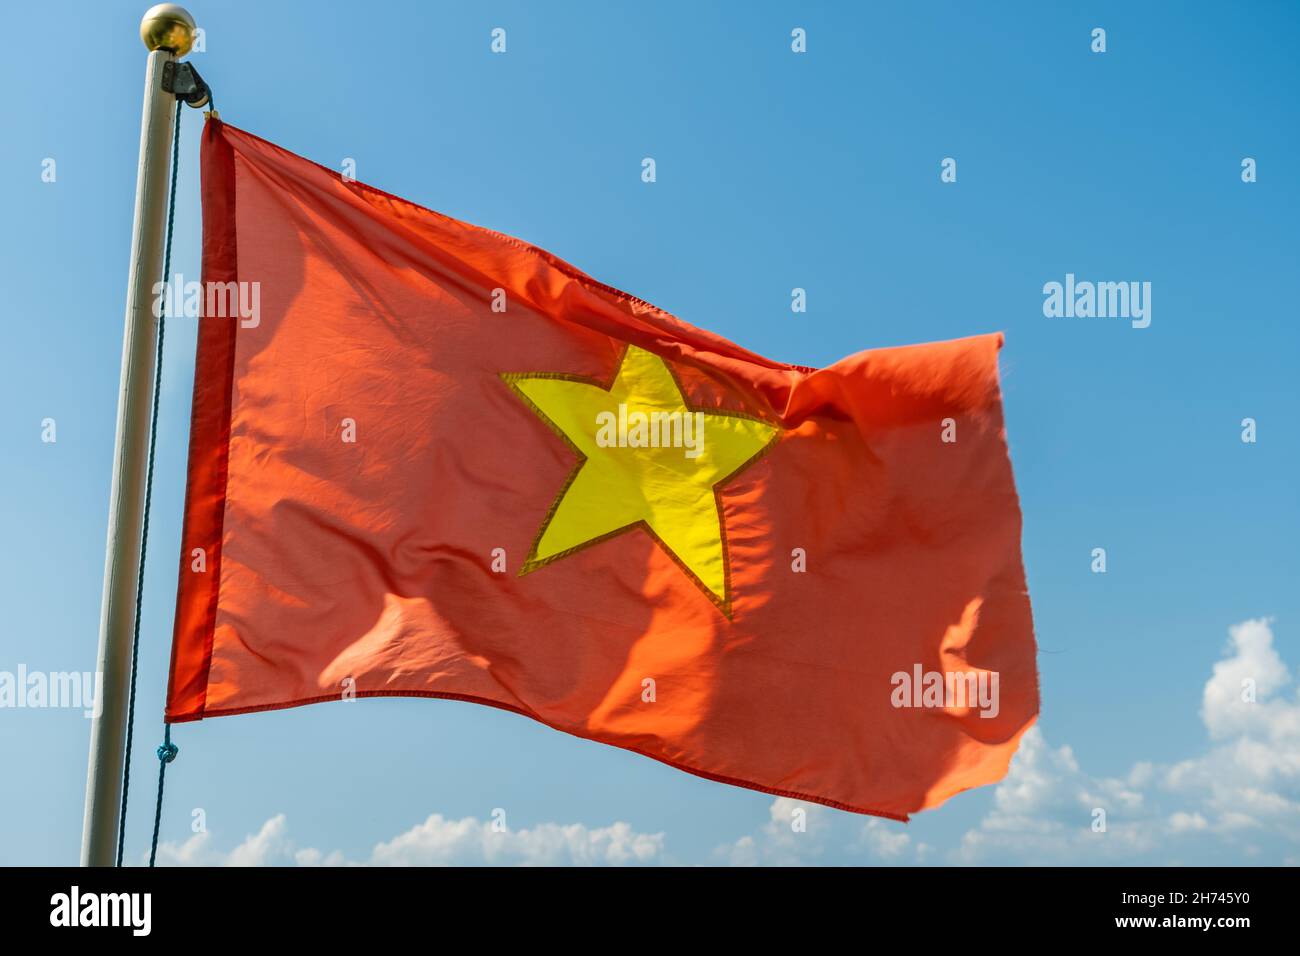 Close up of the red Vietnam National Flag with a gold star in the middle, flying in the sky Stock Photo